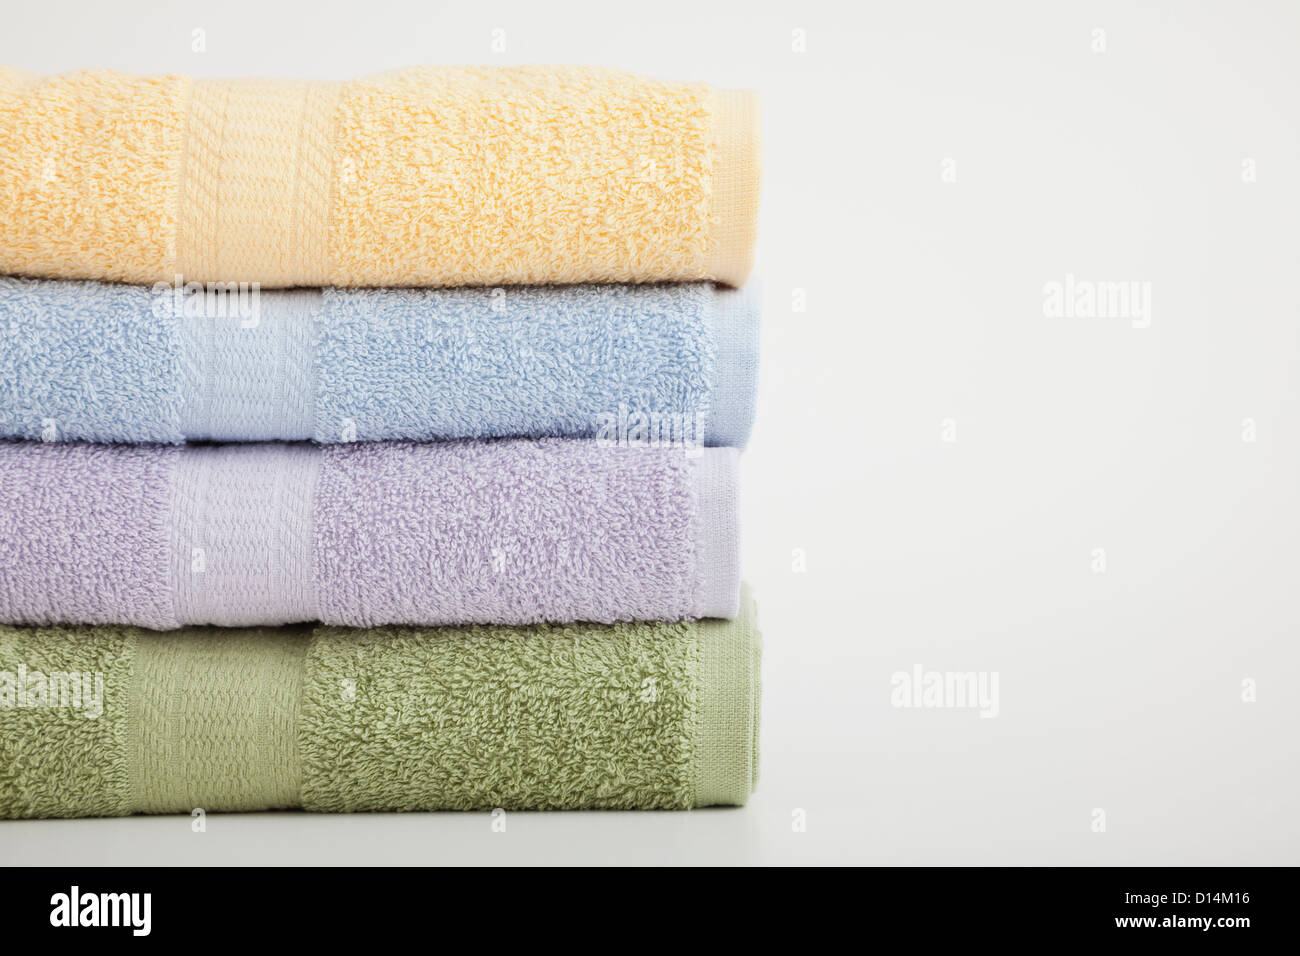 Studio shot of stack of pastel colored towels Stock Photo